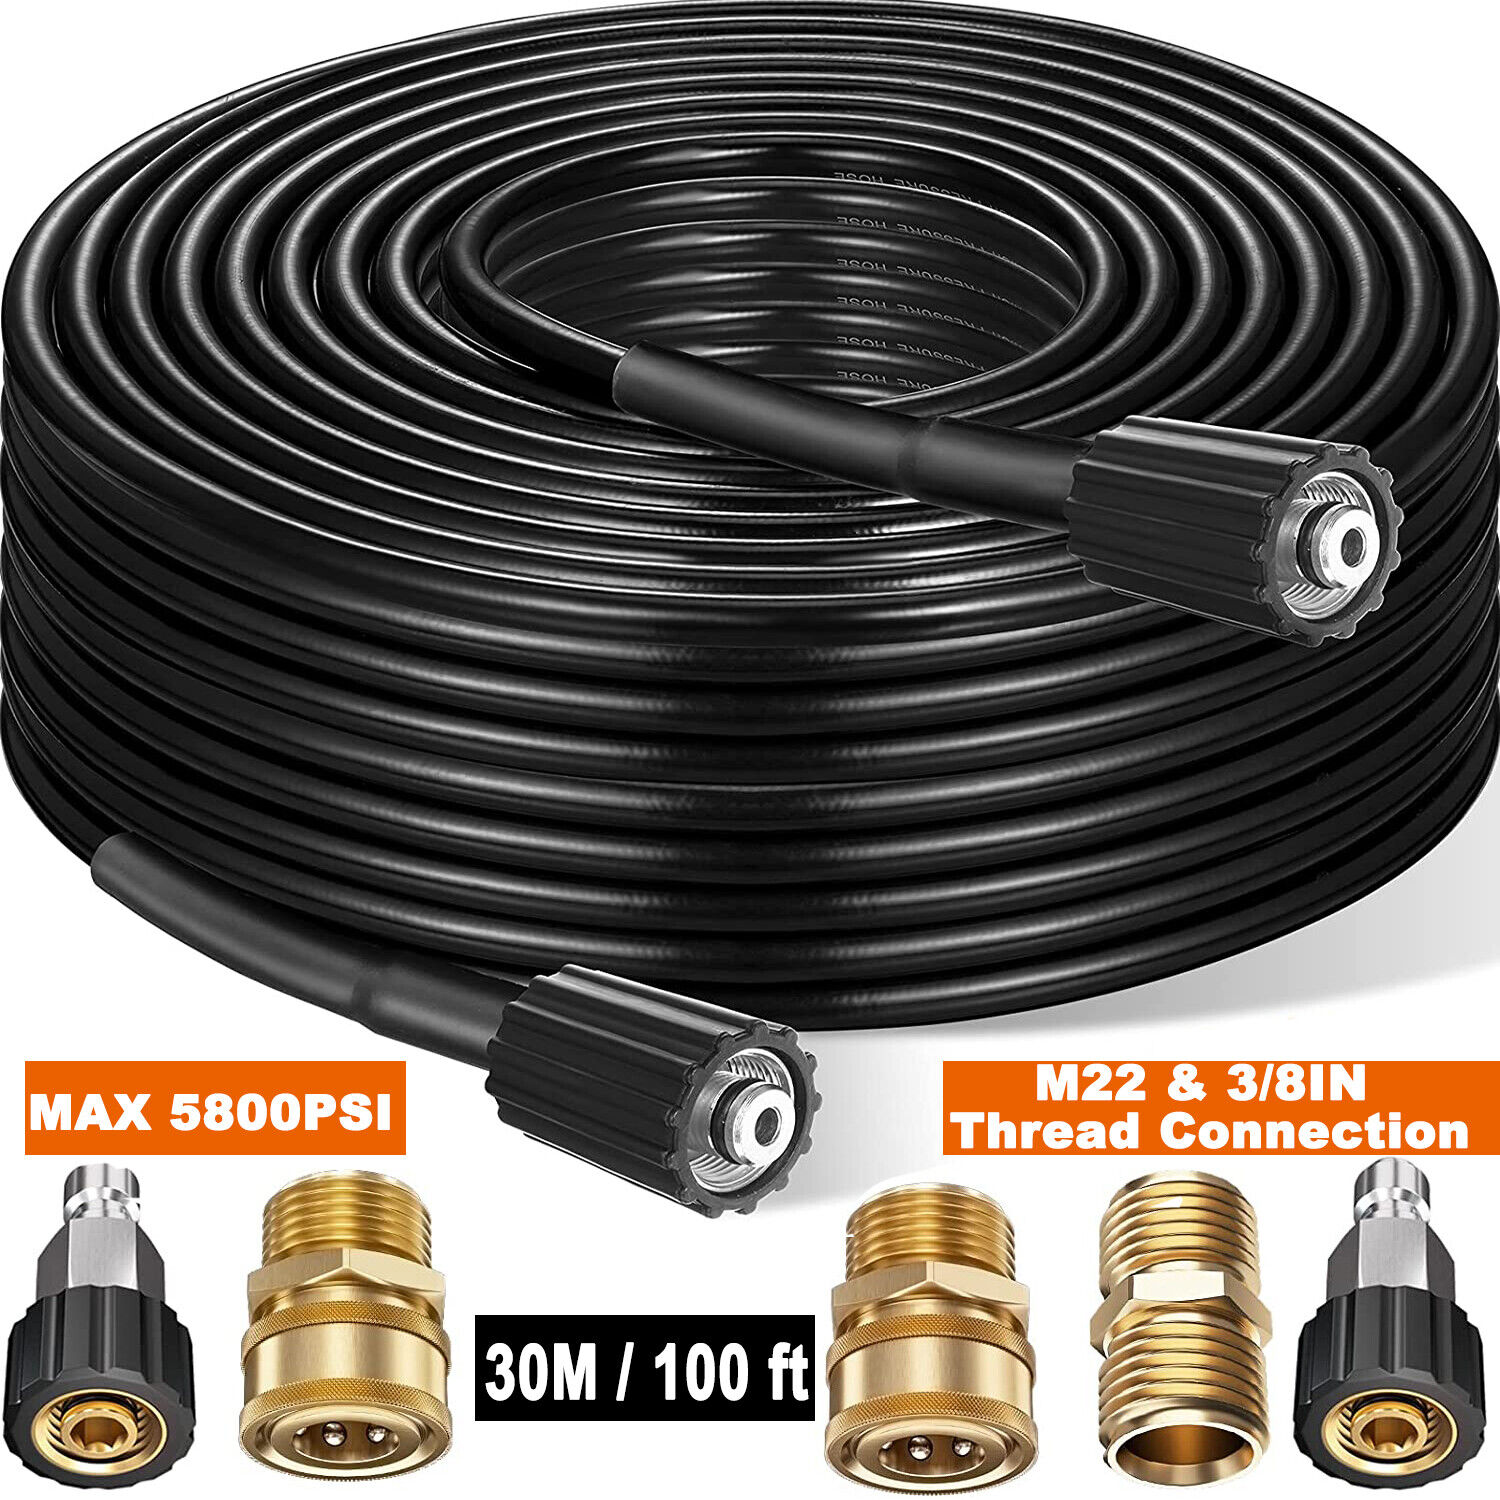 High Pressure Washer Hose 25/50/100ft 5800PSI M22 Power Washer Extension Hose